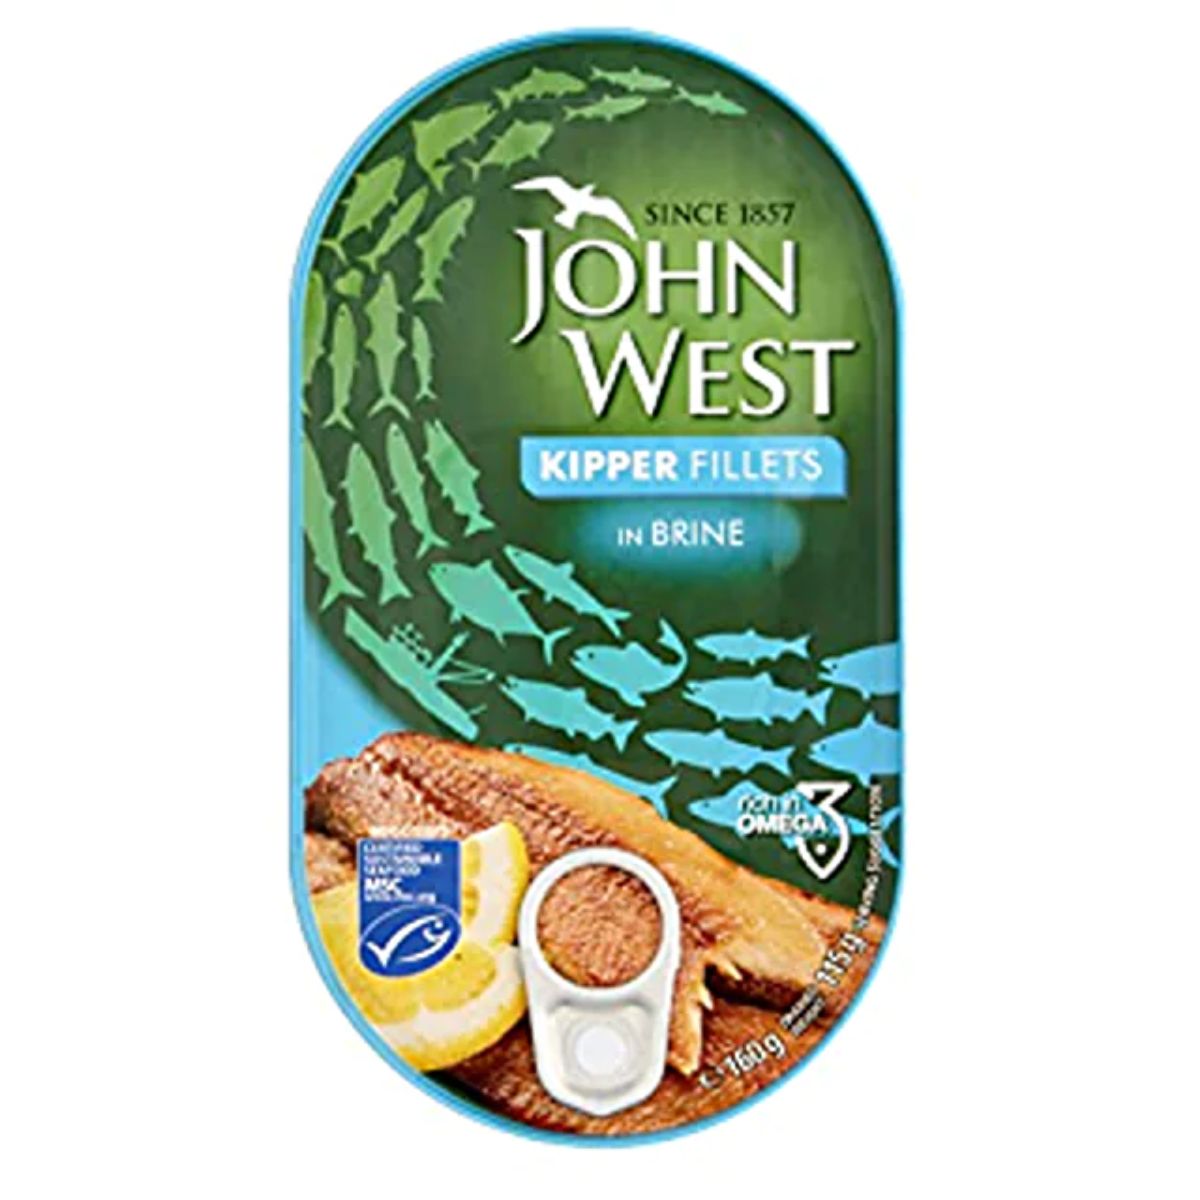 A can of John West - Kipper Fillets in Brine - 160g with omega 3.